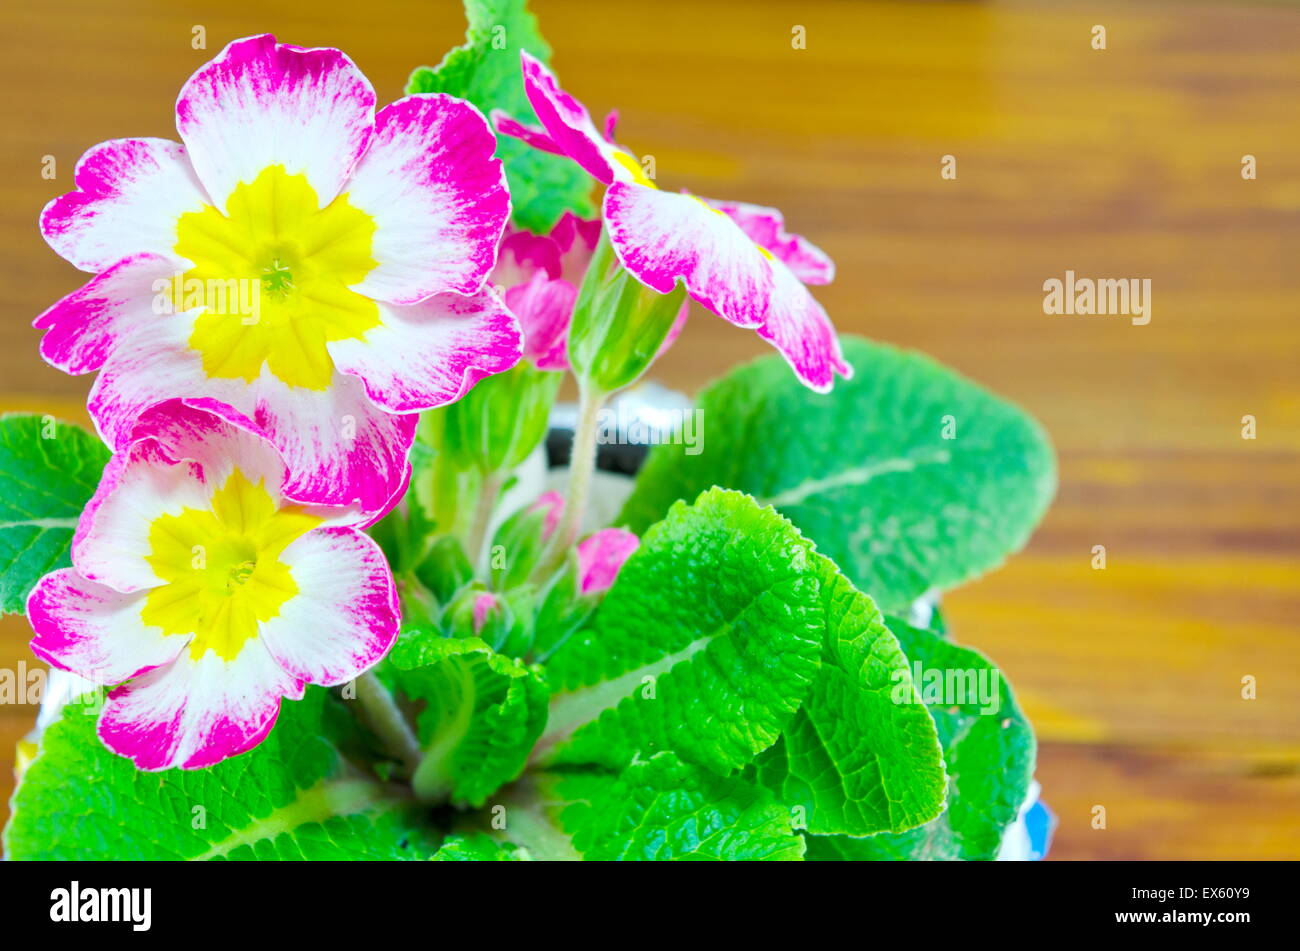 Natural violet flower in a pot on a wooden table Stock Photo